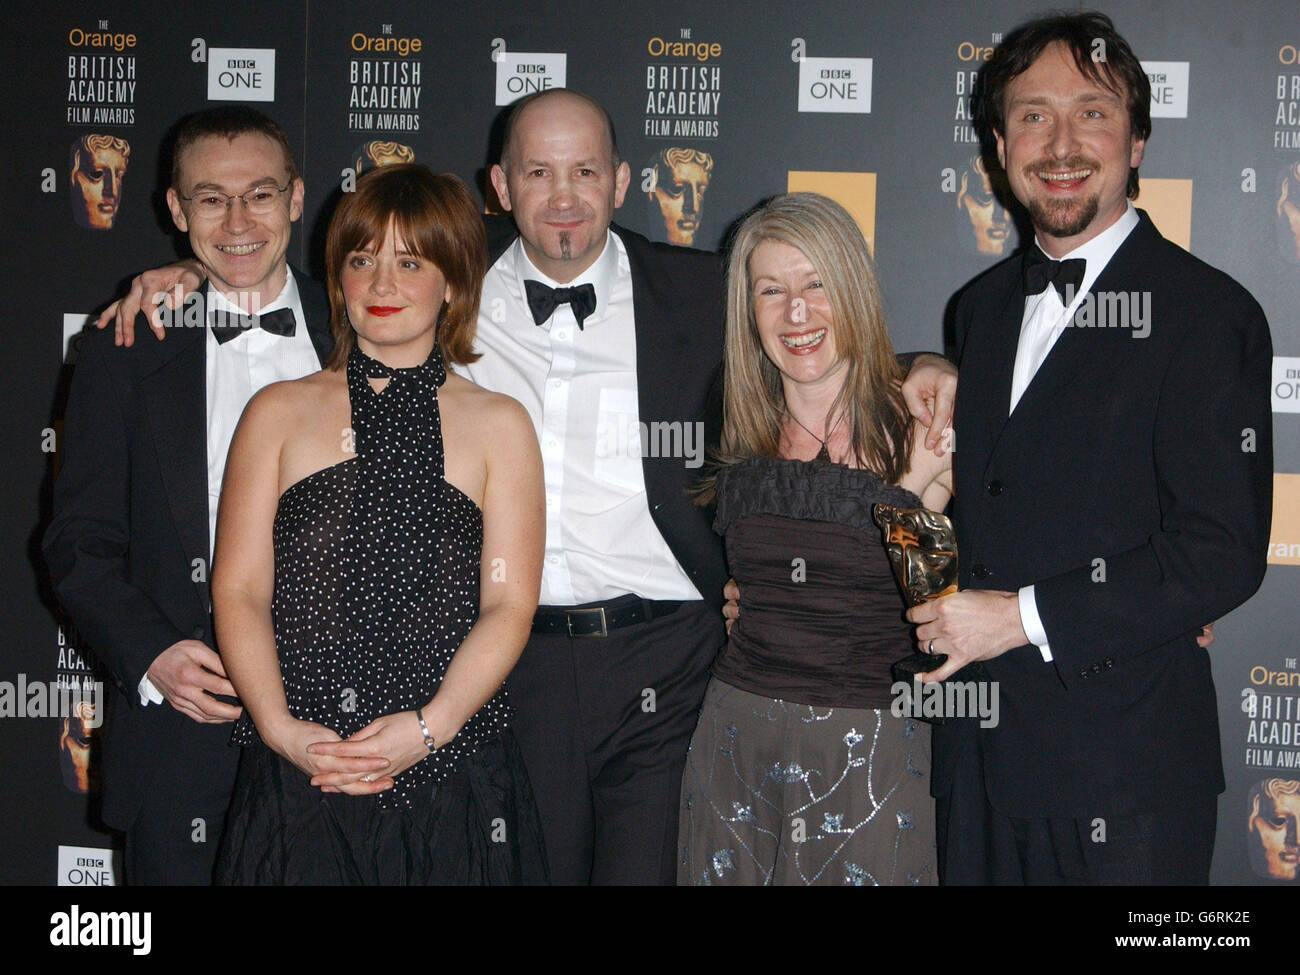 Best short film winners for Brown Paper Bag, left to right, Mark Leveson, Jo McInnes, Geoff Thompson, Natasha Carlish and Michael Baig Clifford during the Orange British Academy Film Awards at the Odeon Leicester Square in London. Stock Photo